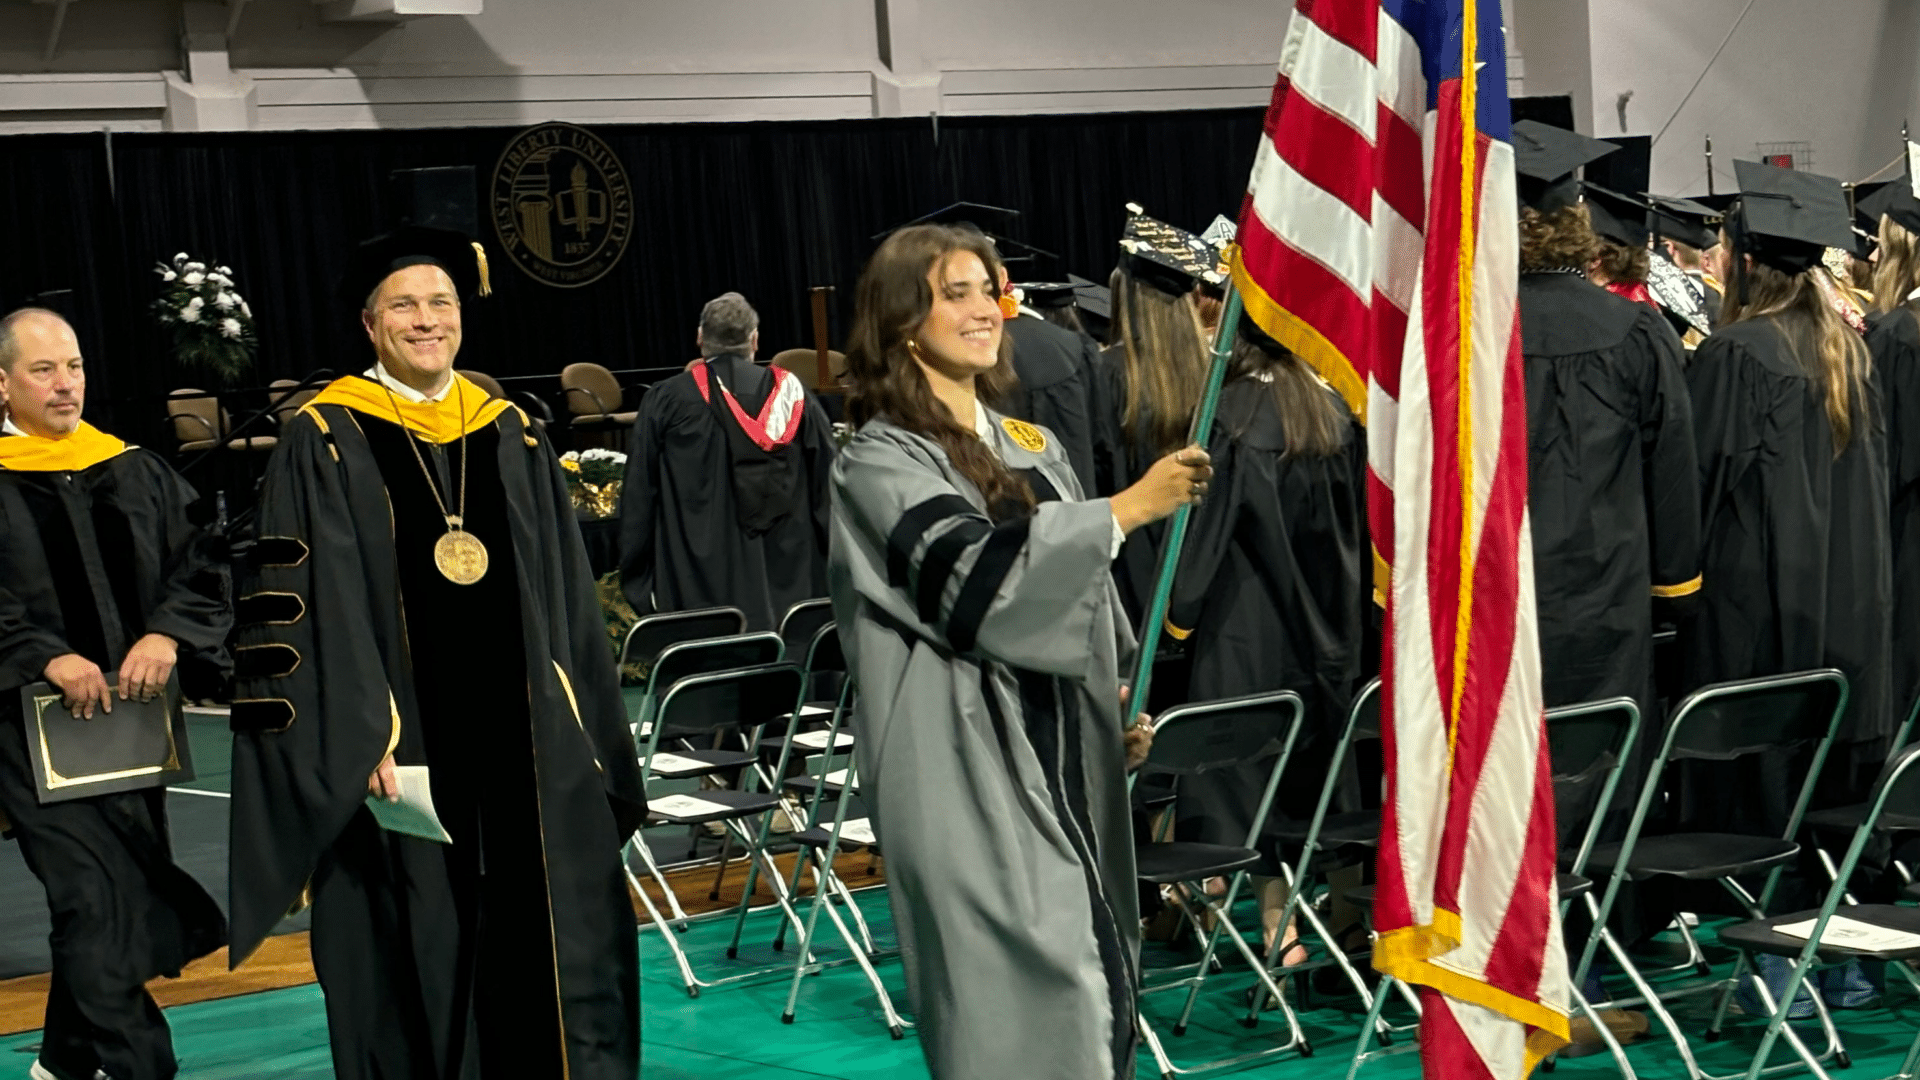 West Liberty Awards Degrees in Saturday Ceremony